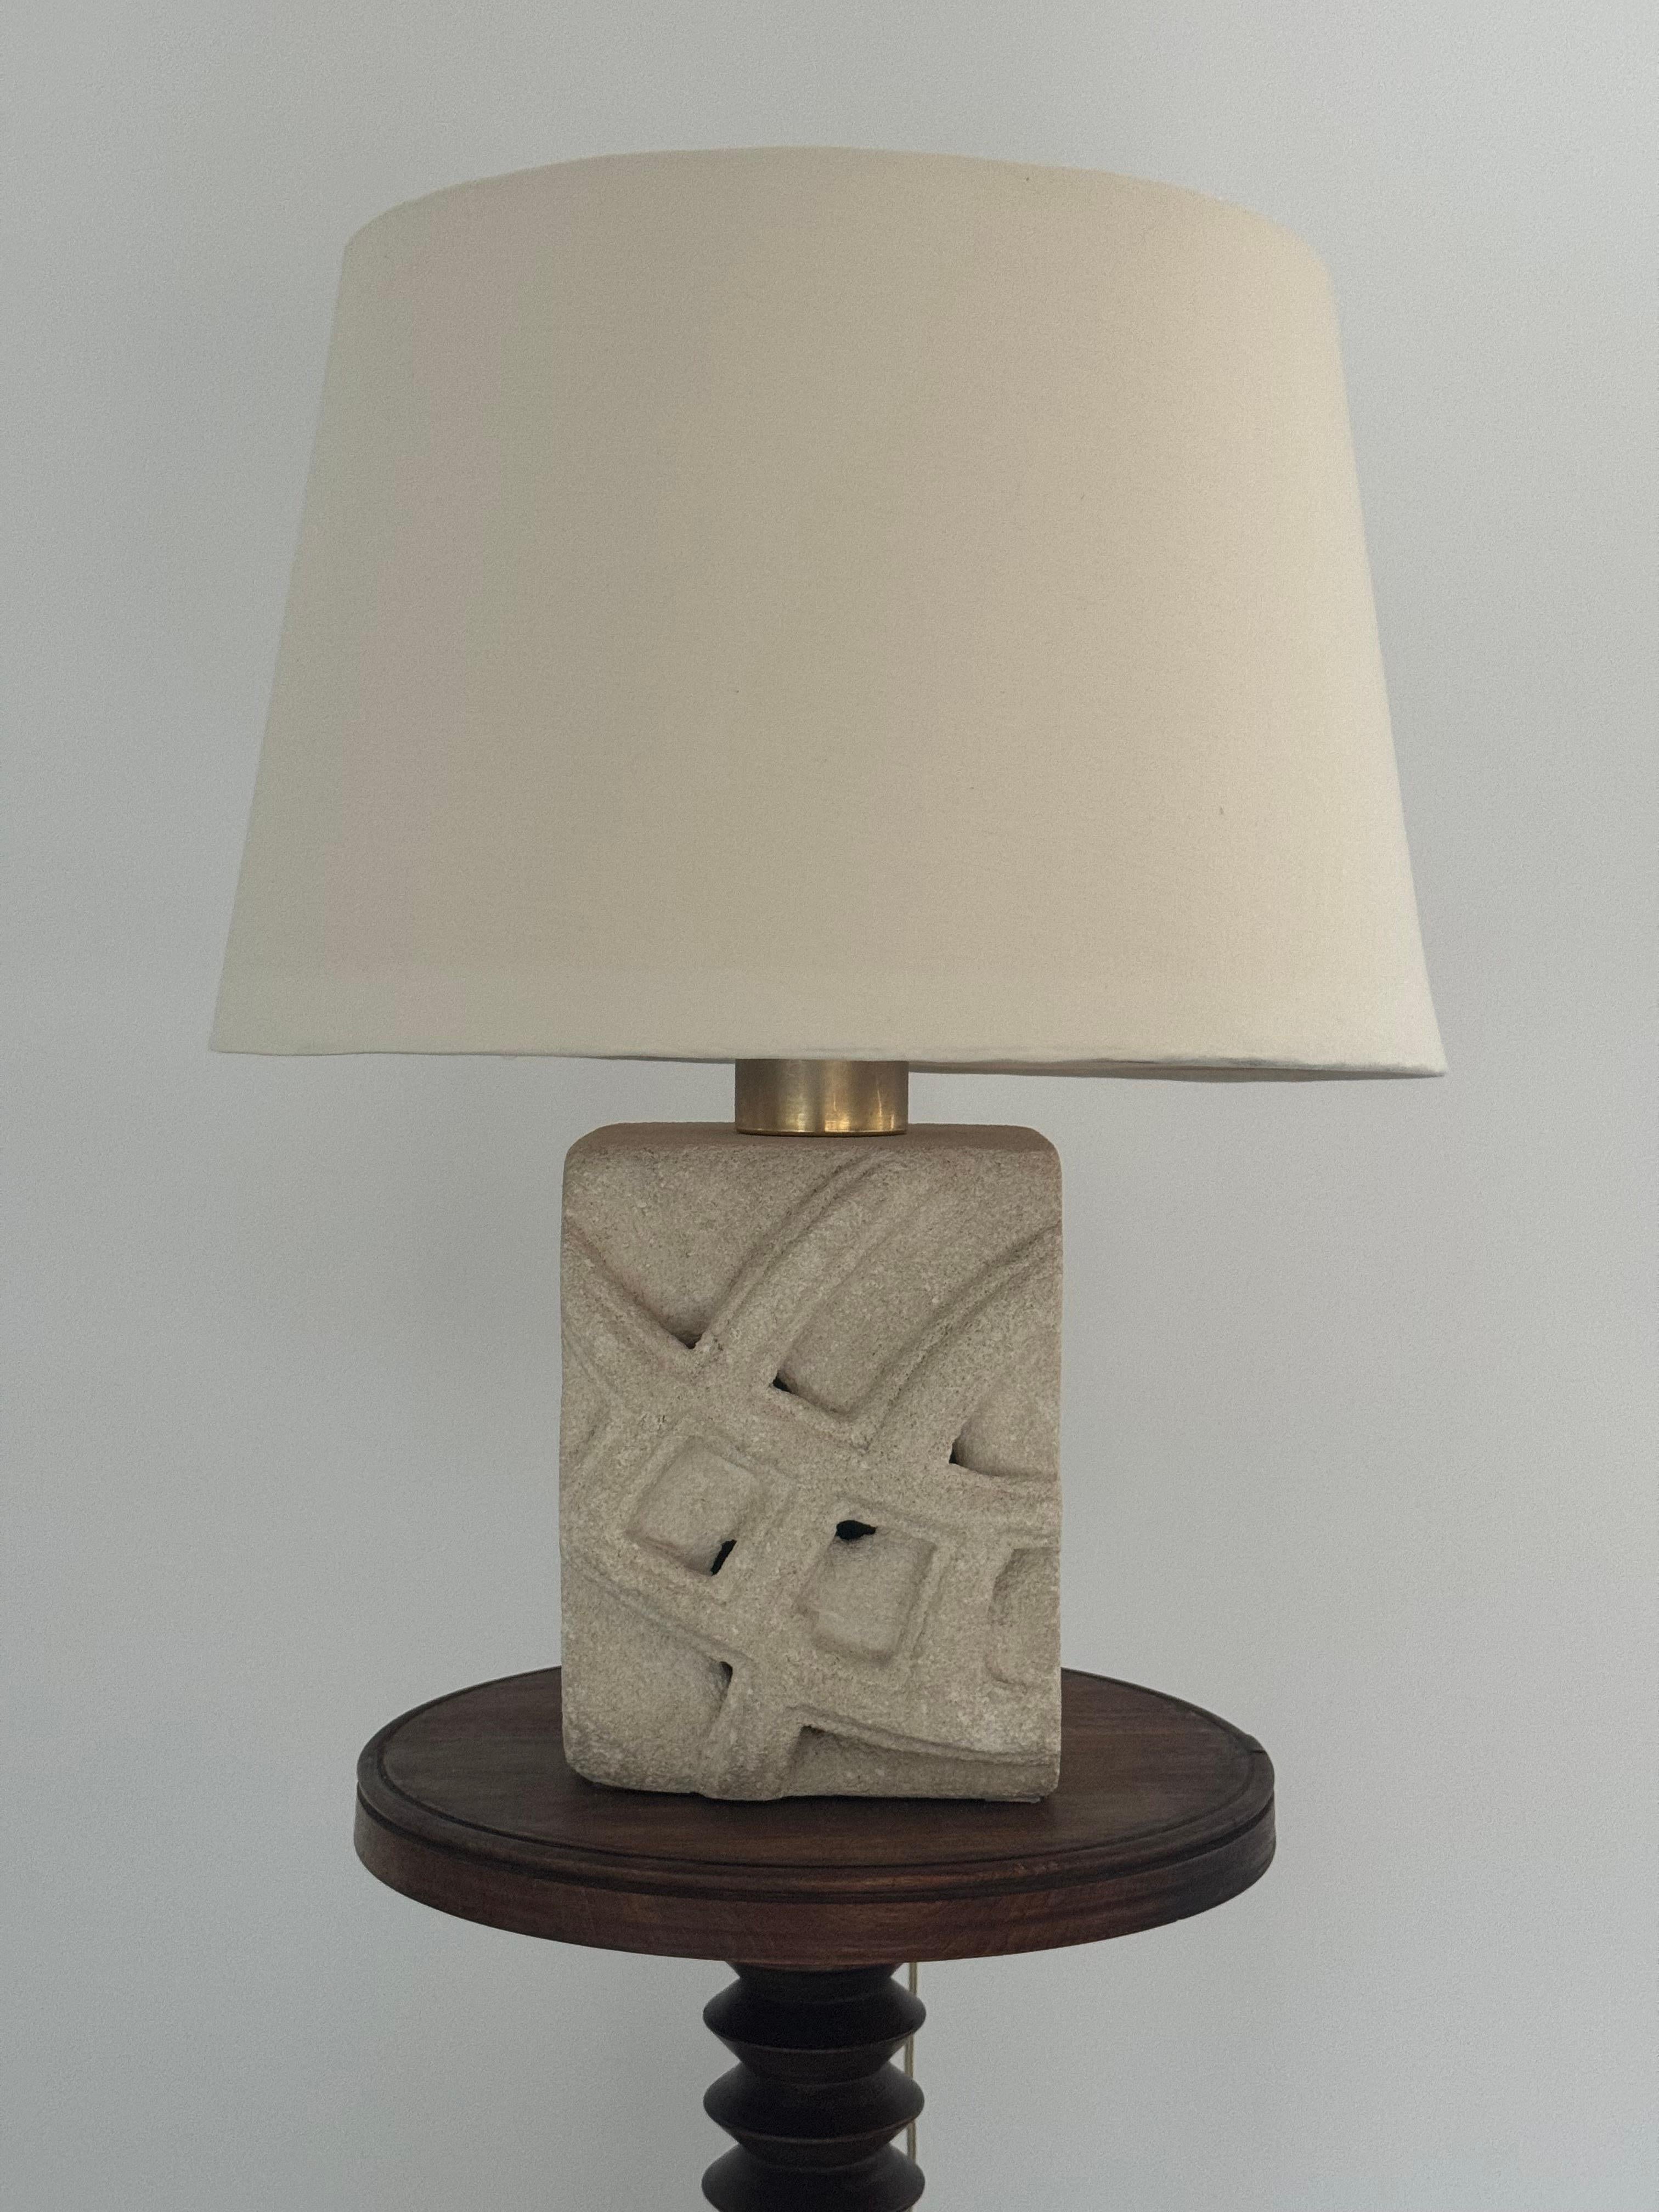 Albert Tormos, French massive stone sculpture lamp with abstract design, 1970s For Sale 4